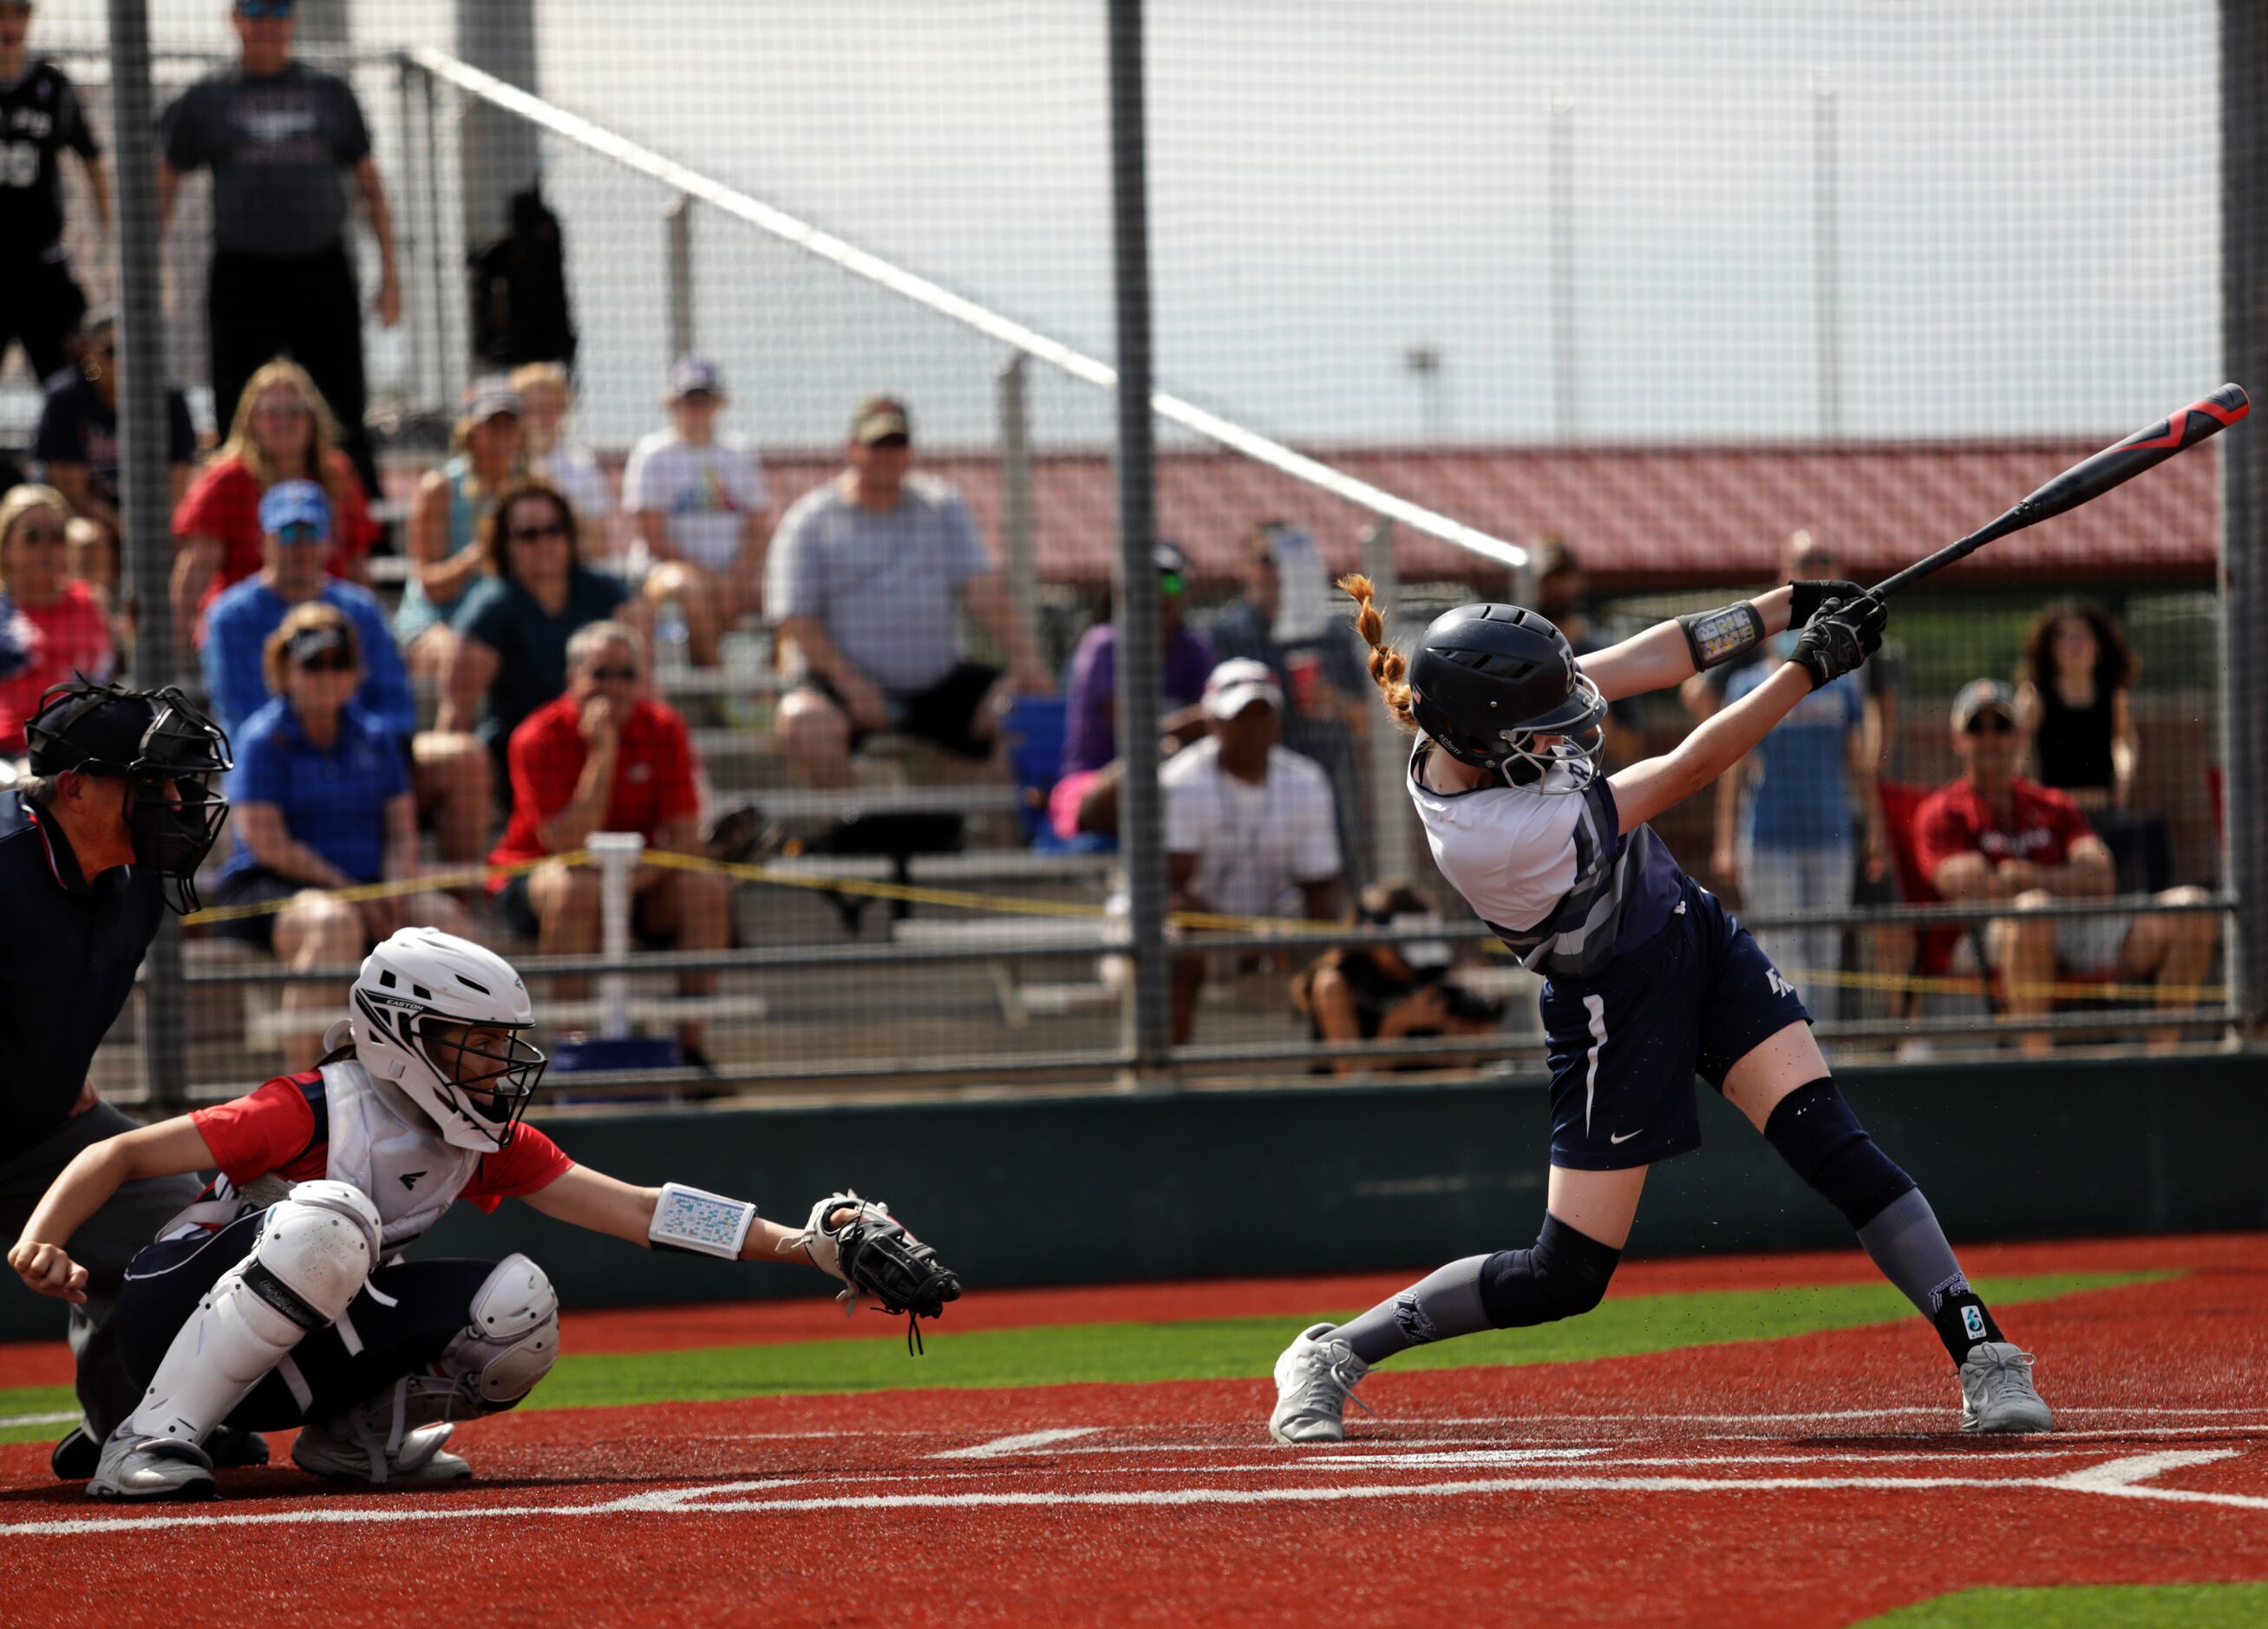 Flower Mound High School player #8, Carsyn Lee, swings for the ball during a softball game...